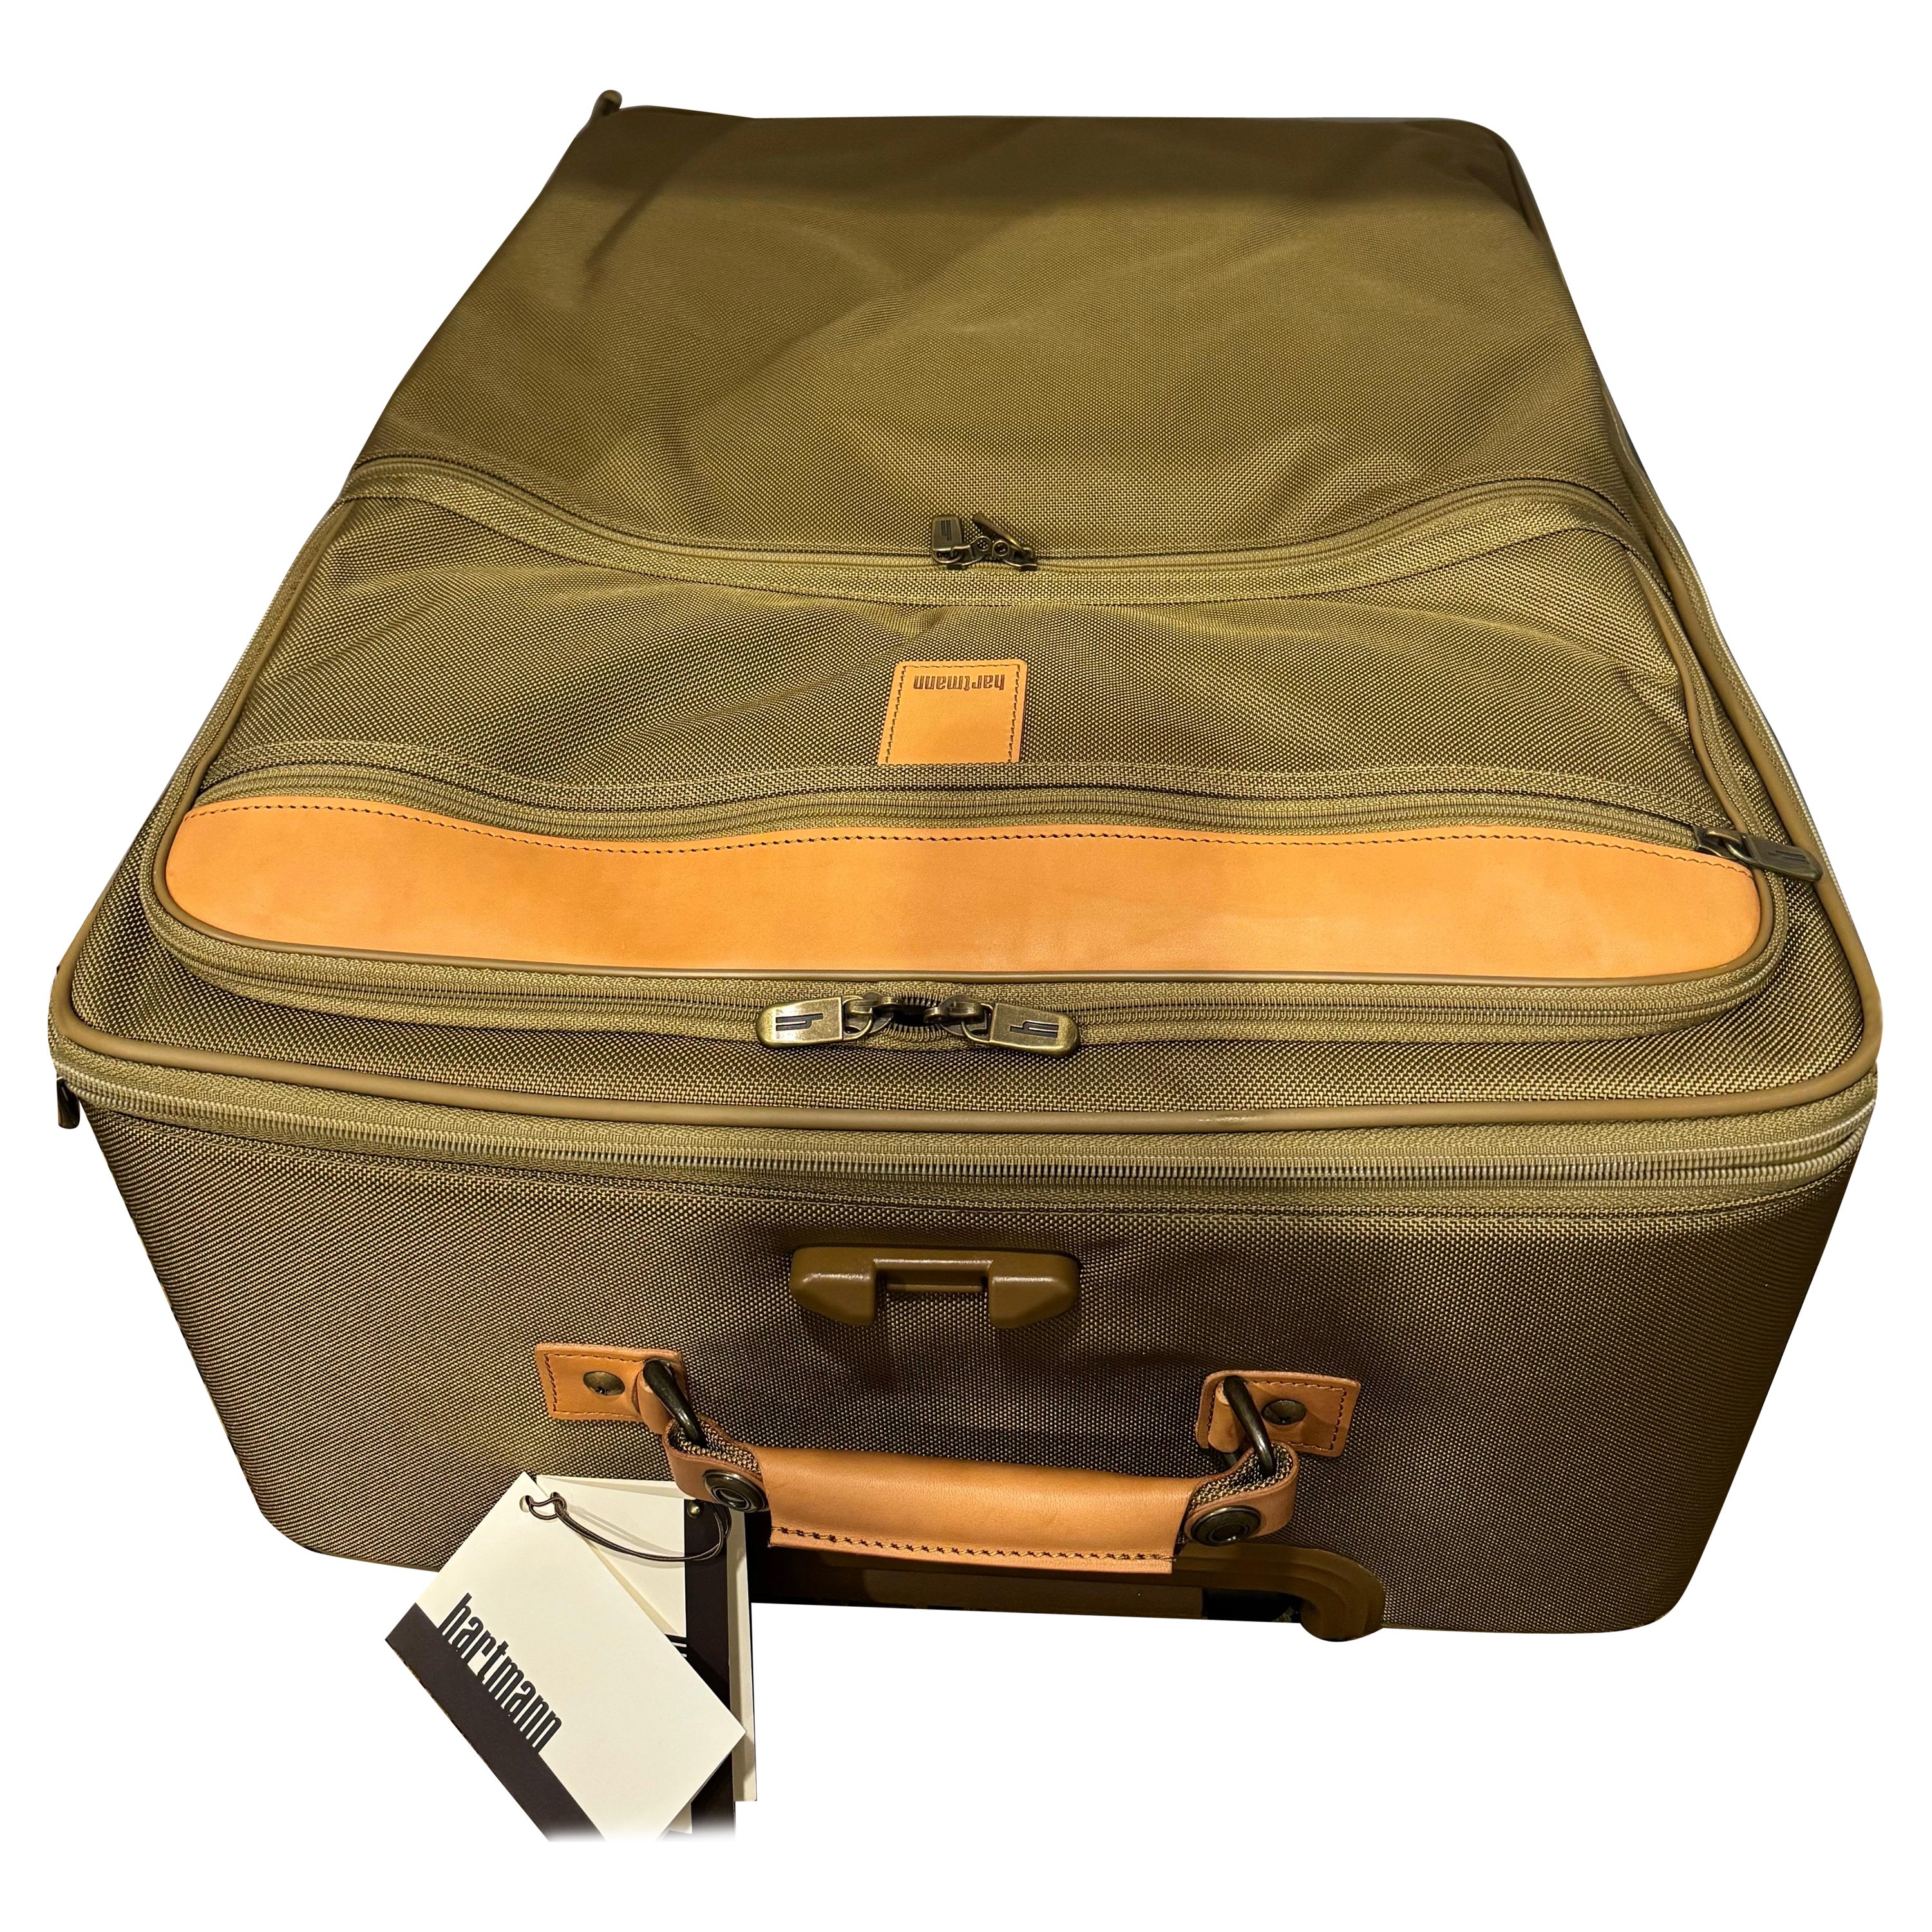 Vintage Hartmann Intensity collection Large 27 inch suitcase Brand New in a Box For Sale